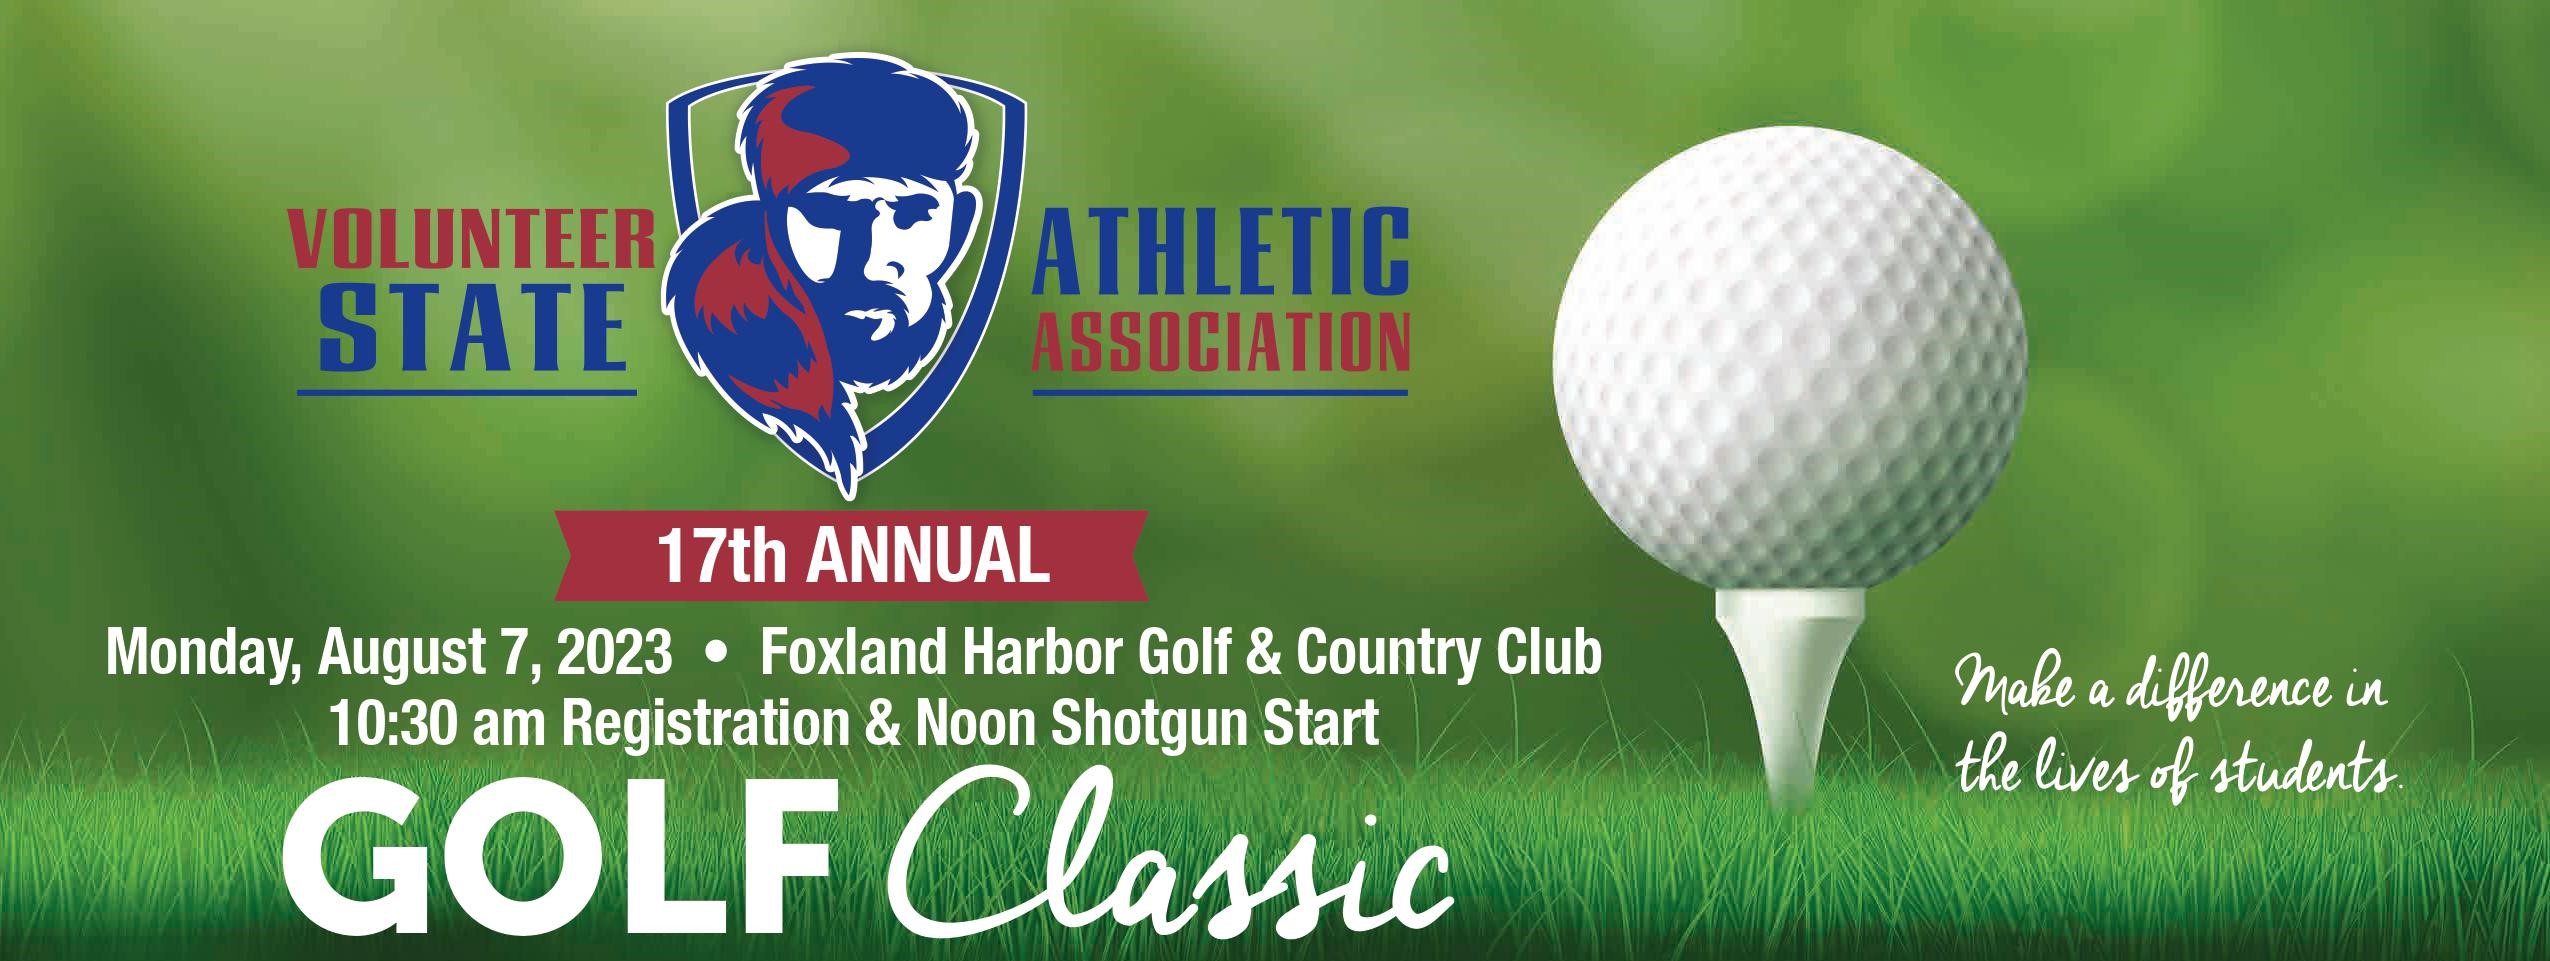 17th Annual Vol State Golf Classic Set for August 7th